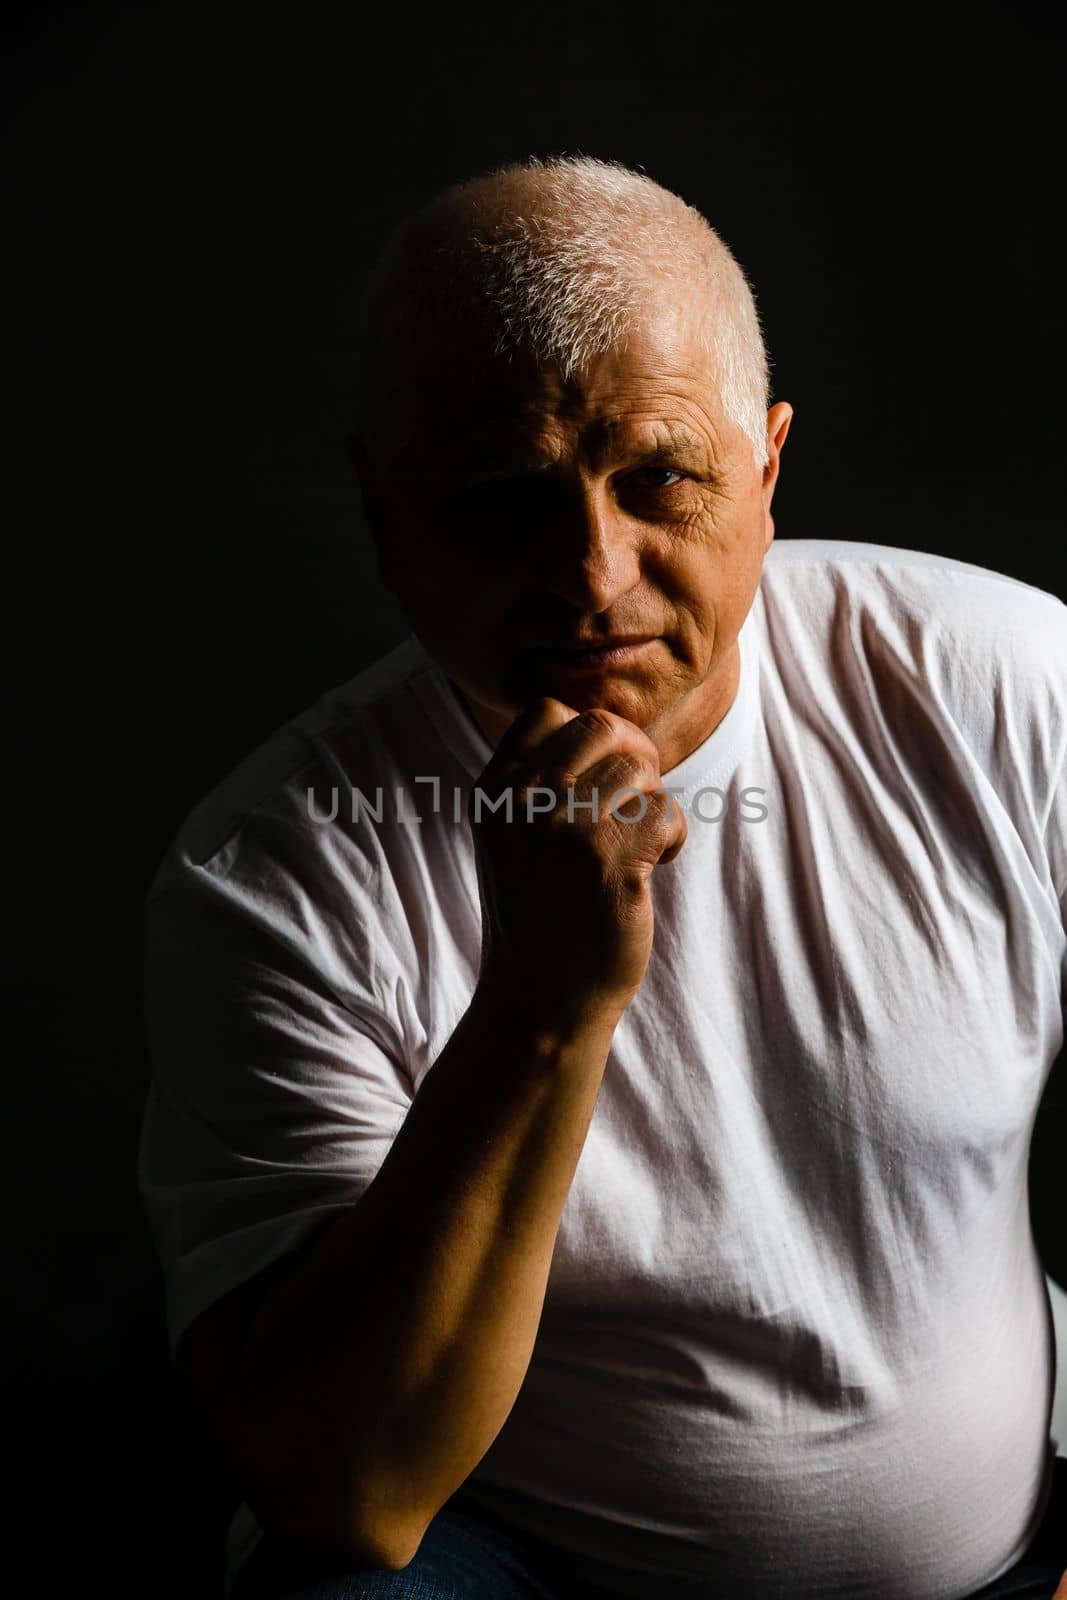 Old senior man closeup serious expression portrait by Andelov13